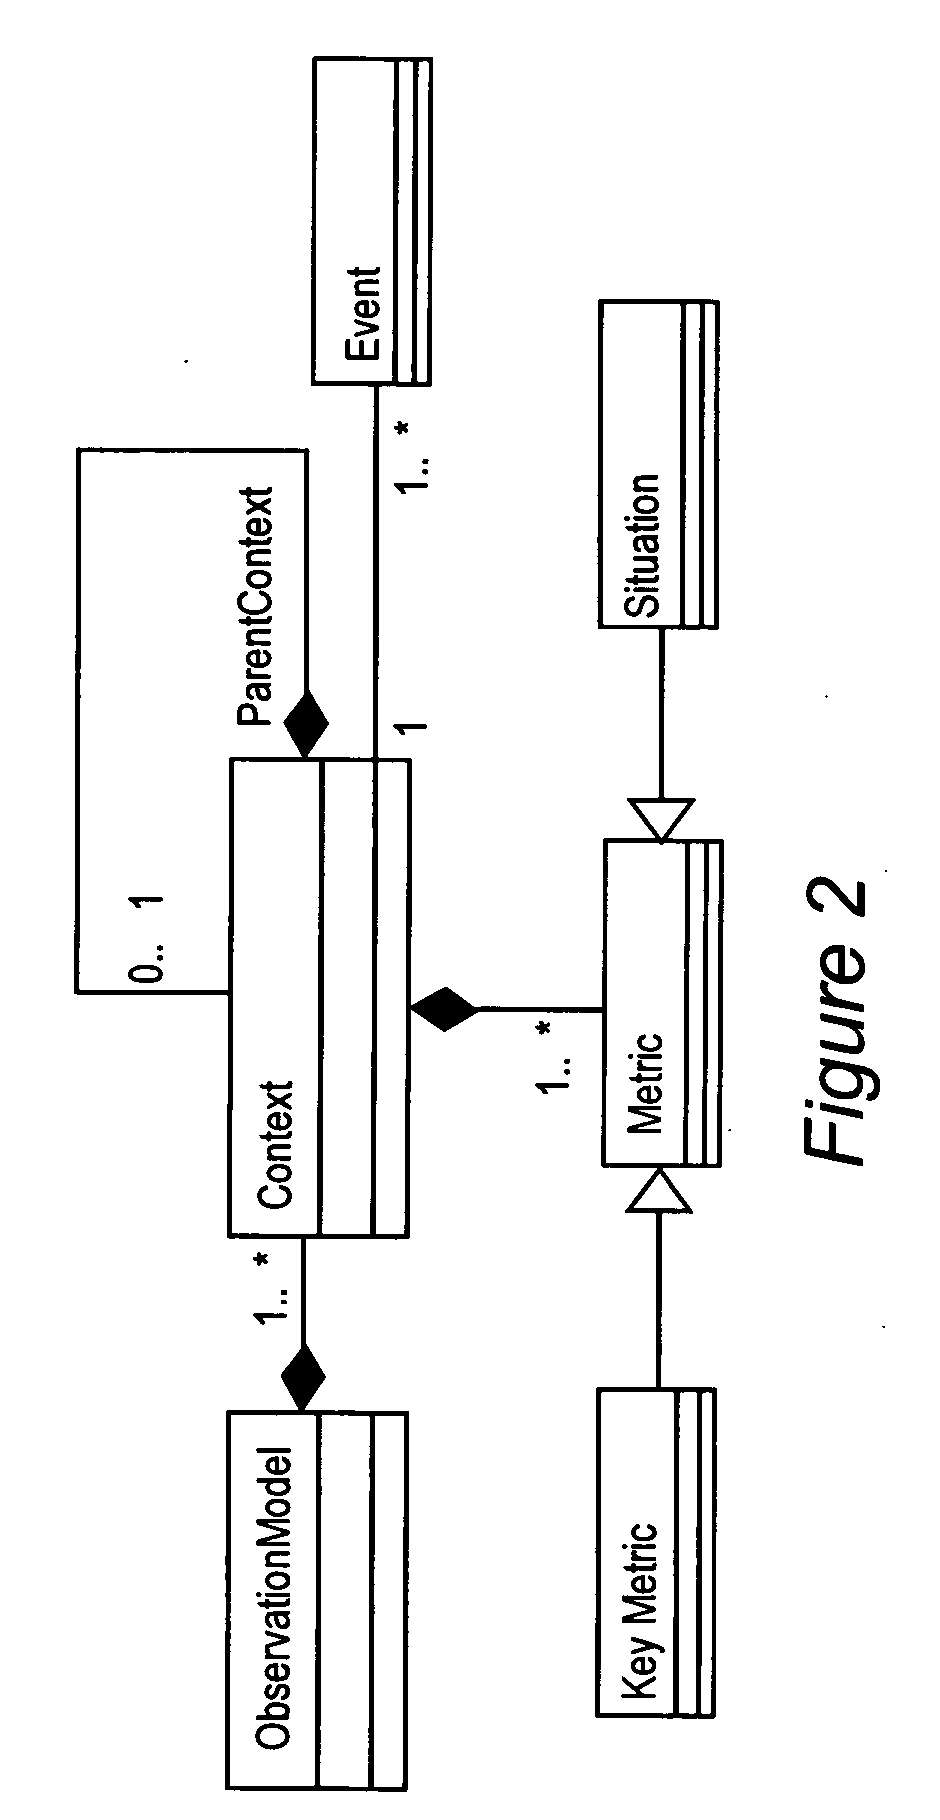 Method and apparatus for model-driven business performance management